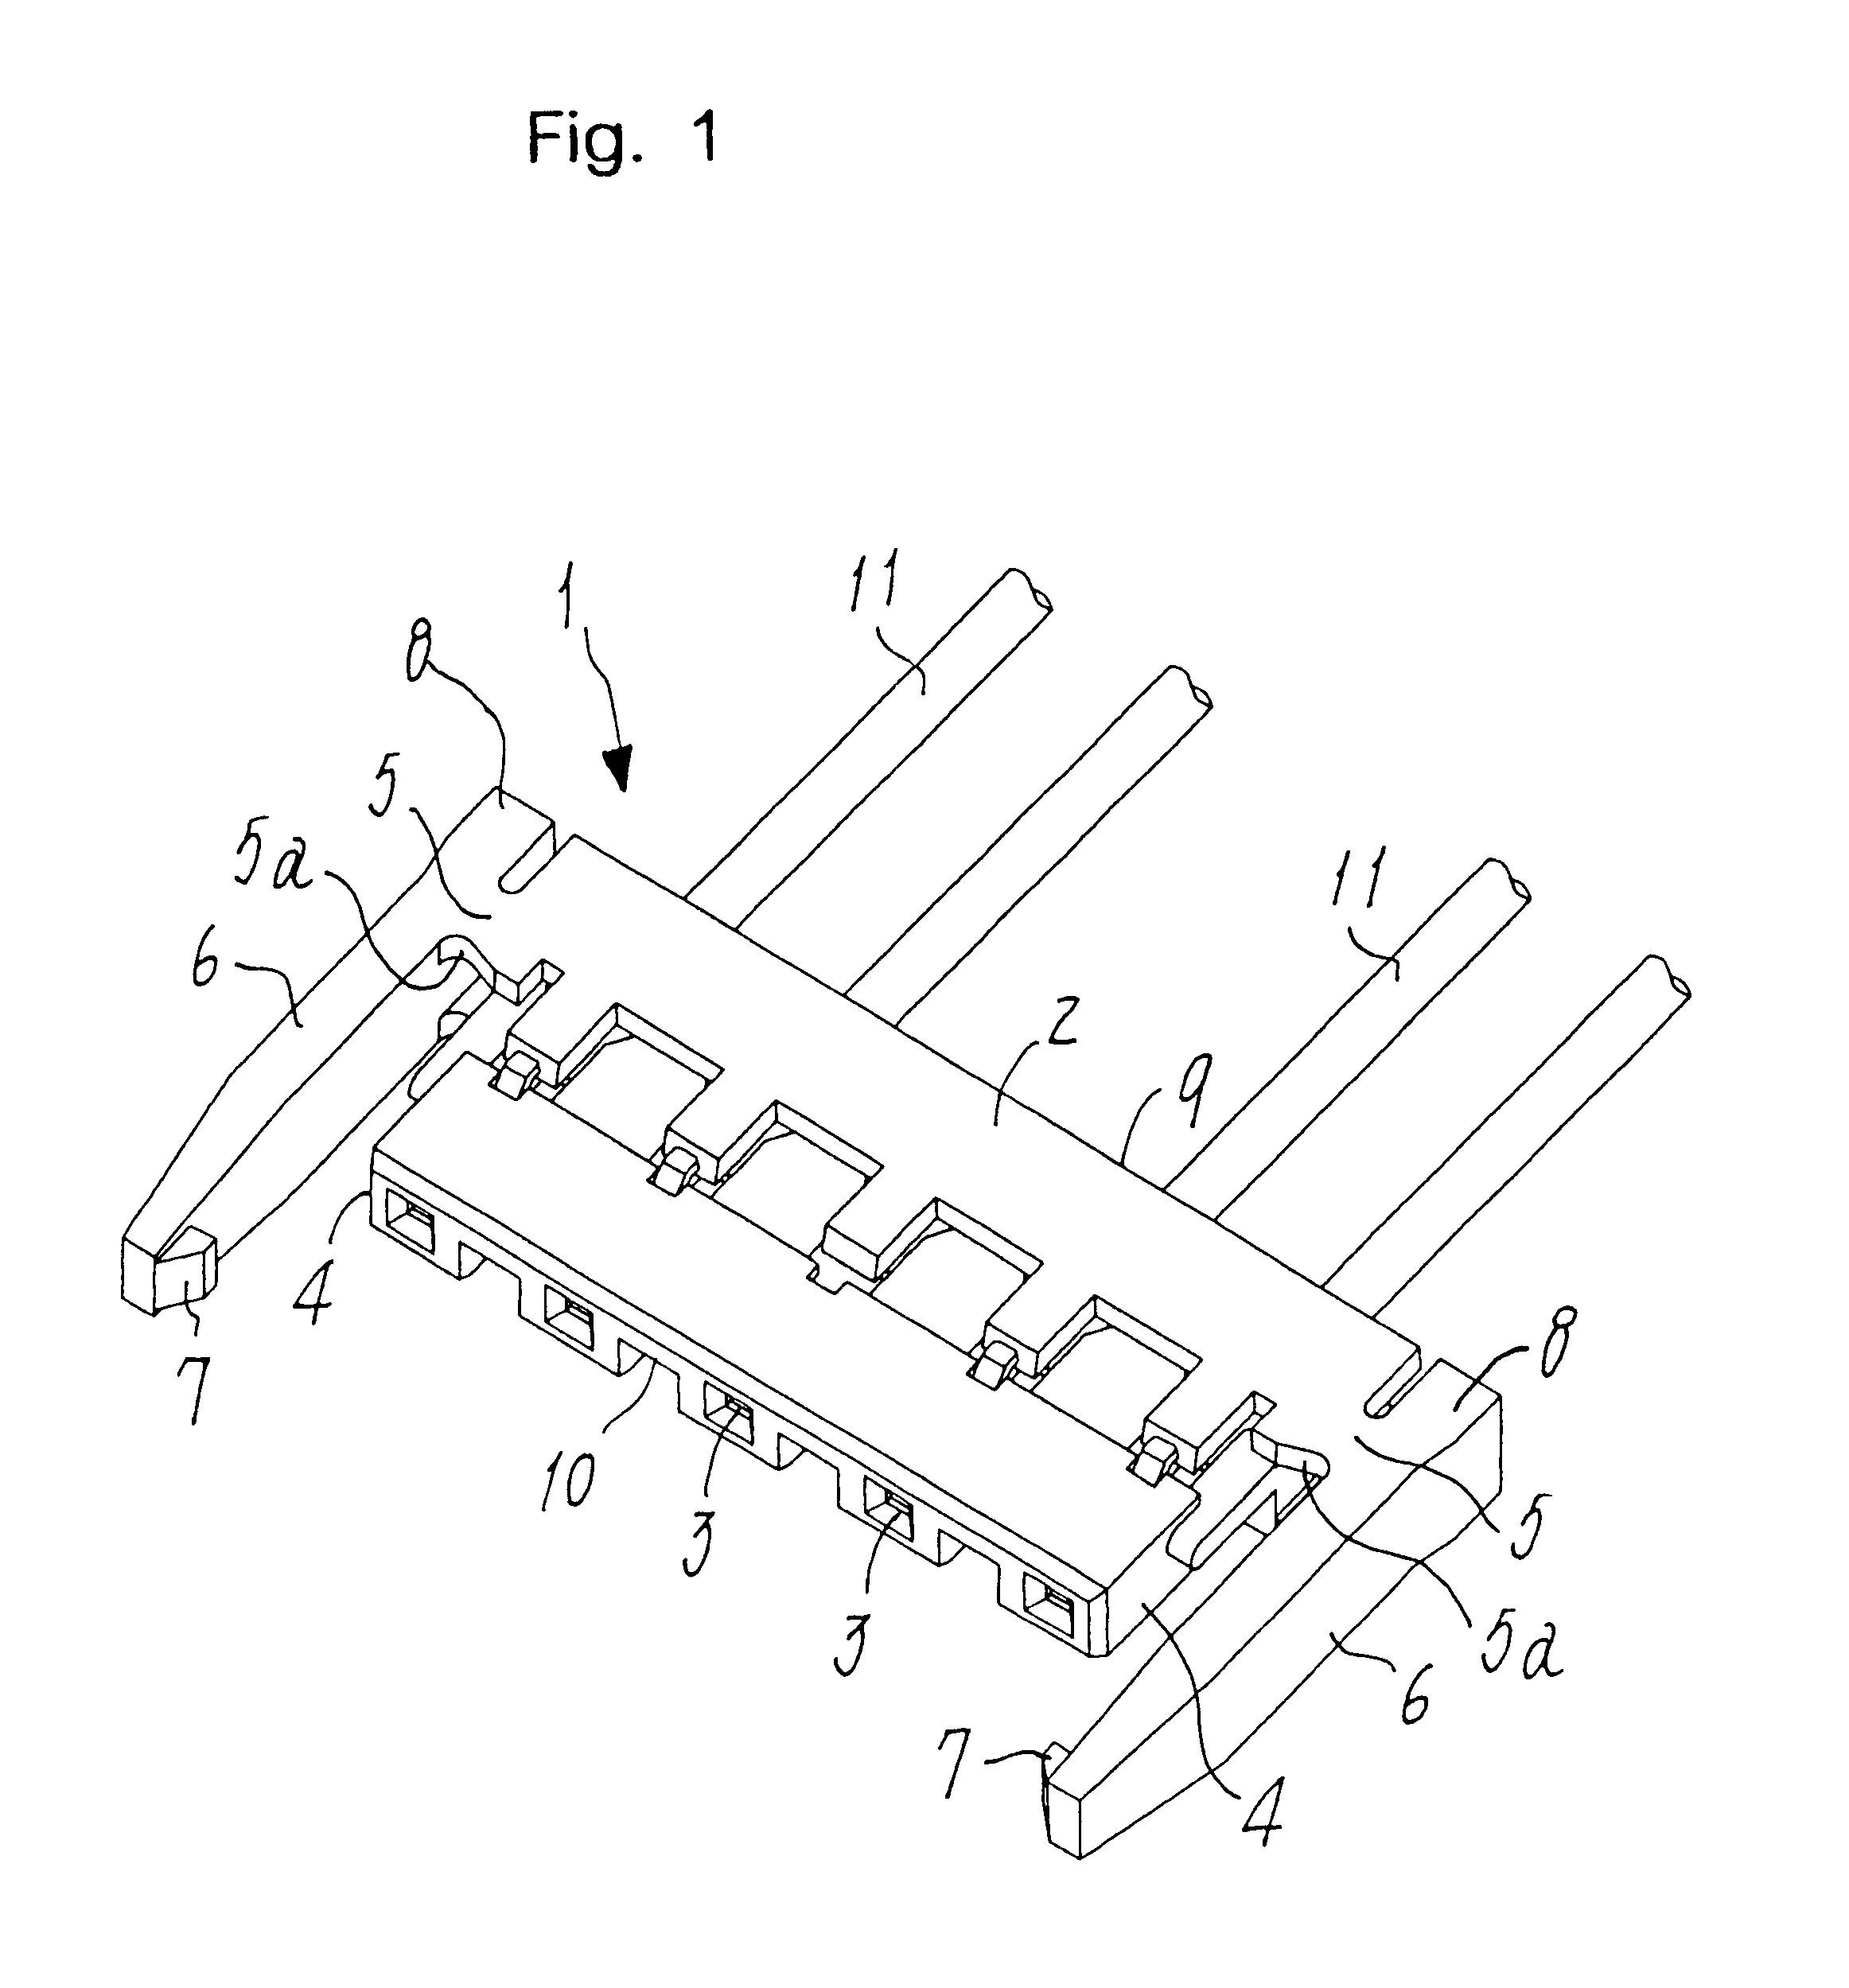 Structure for interlocking connectors